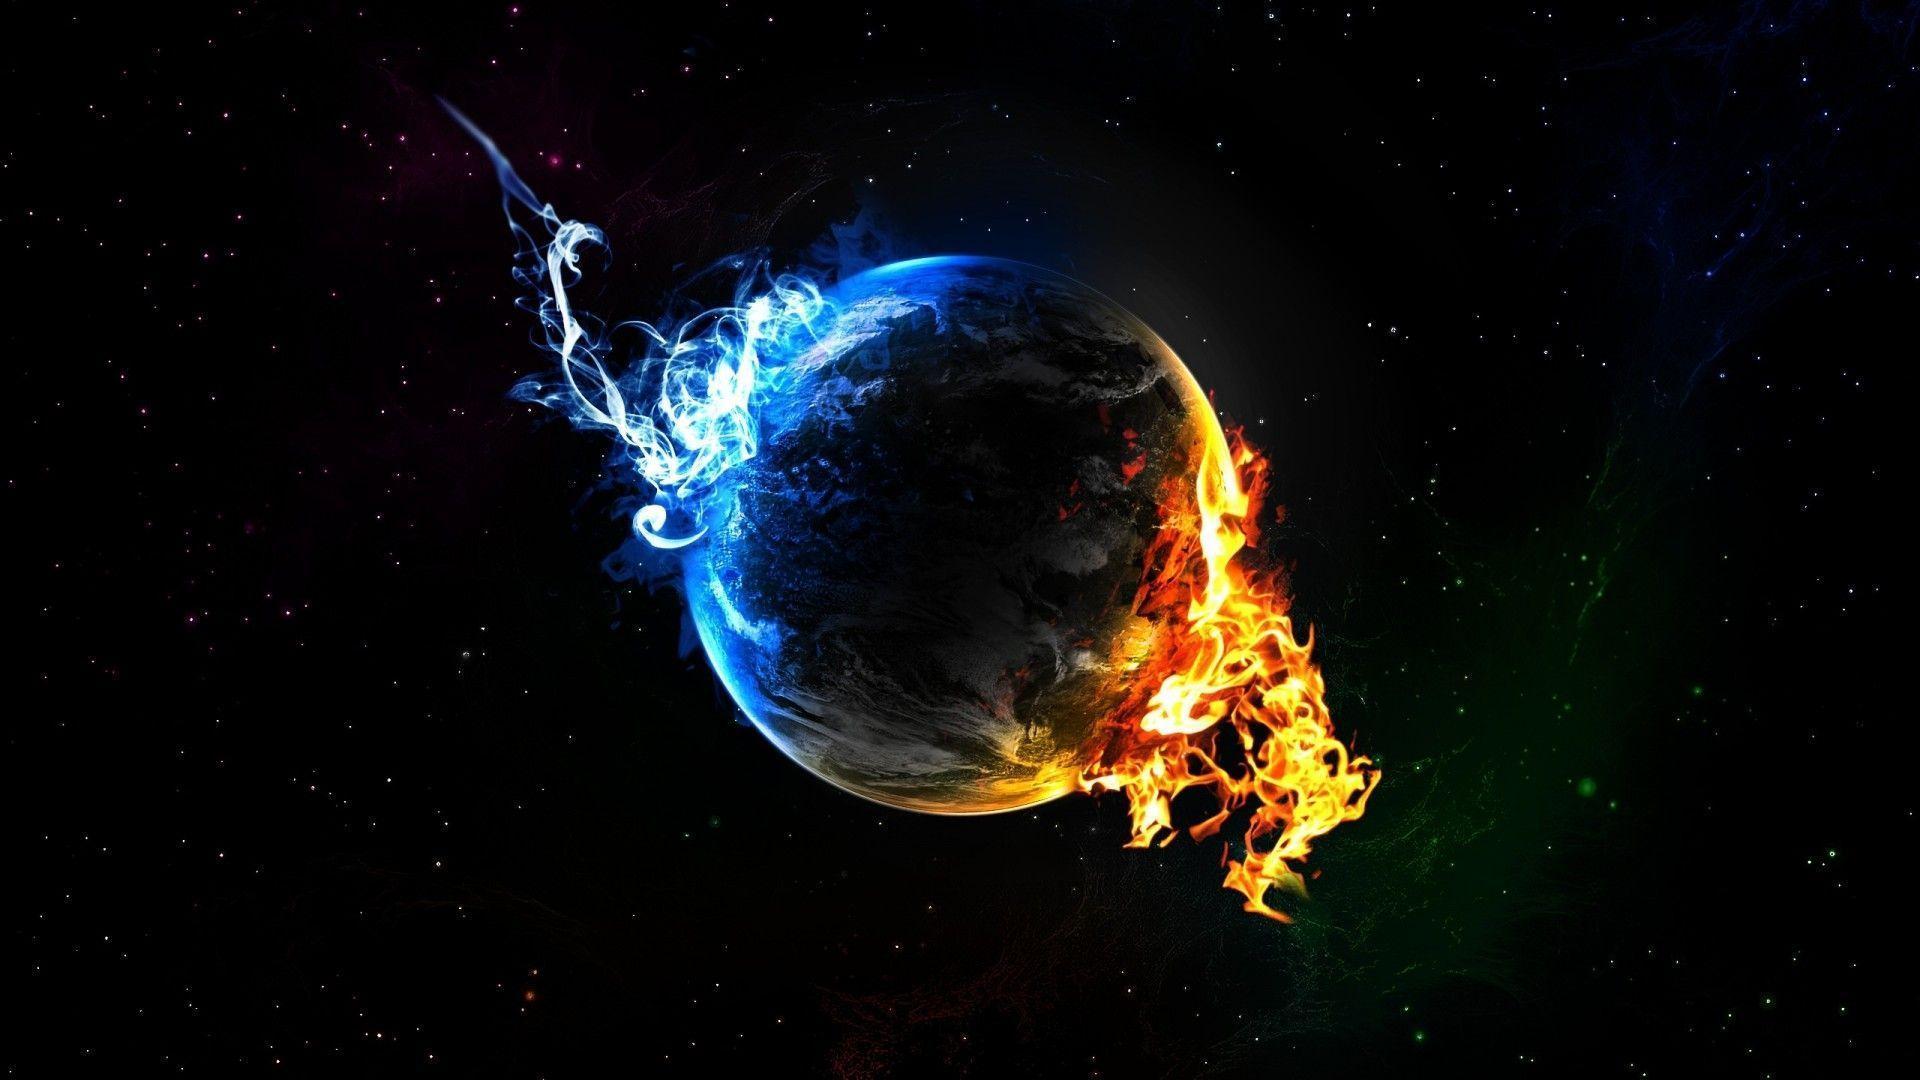 Earth Fire and Ice Image. Free Desktop HD Wallpaper